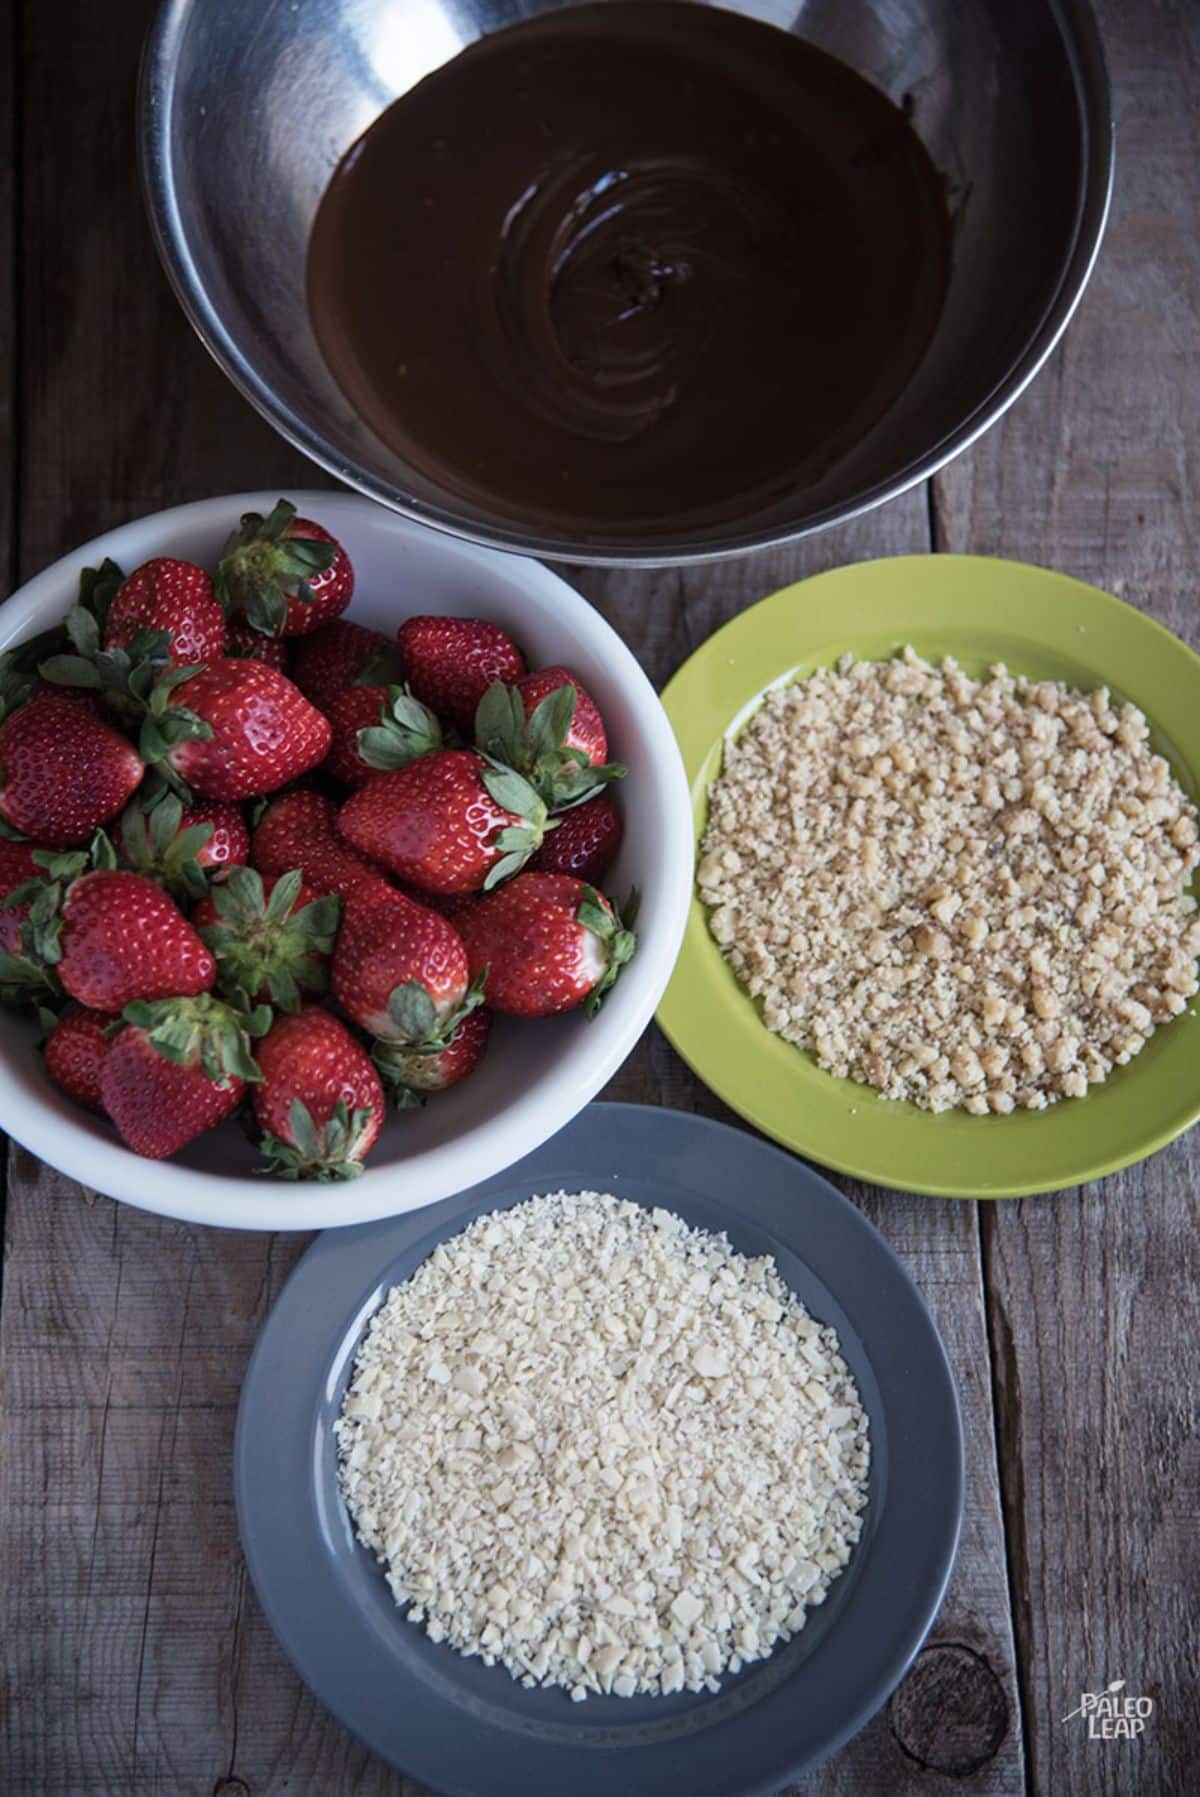 Chocolate-Covered Strawberries Dipped In Nuts Recipe Preparation